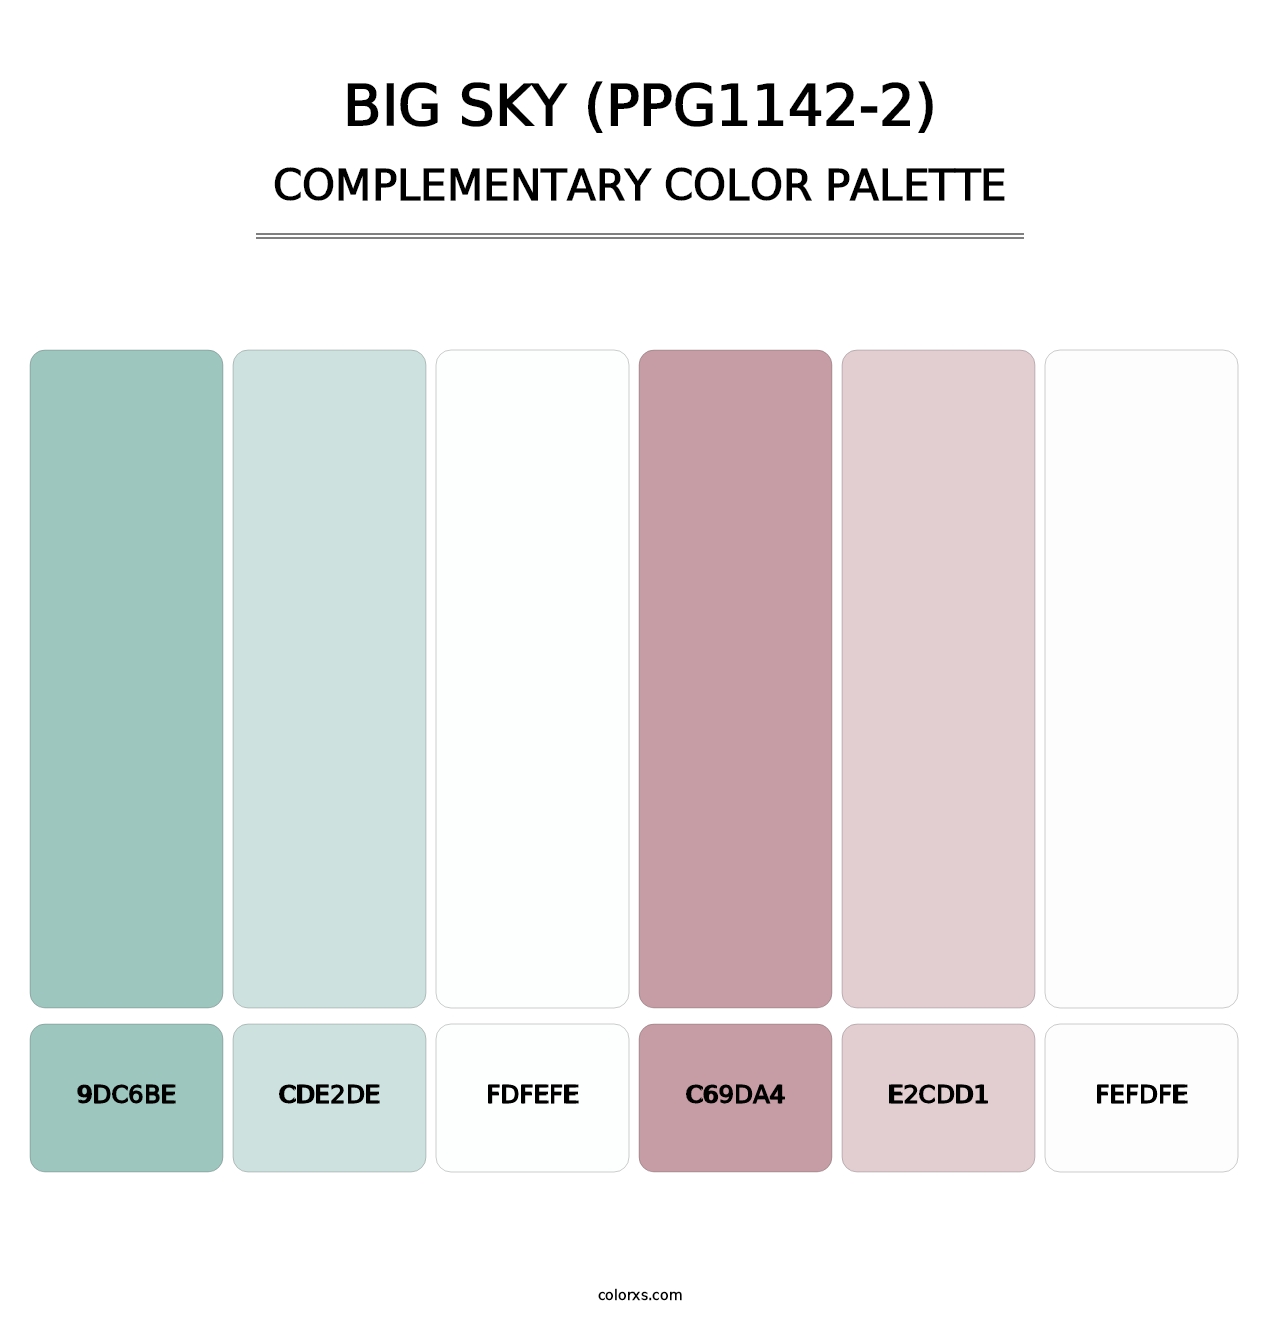 Big Sky (PPG1142-2) - Complementary Color Palette